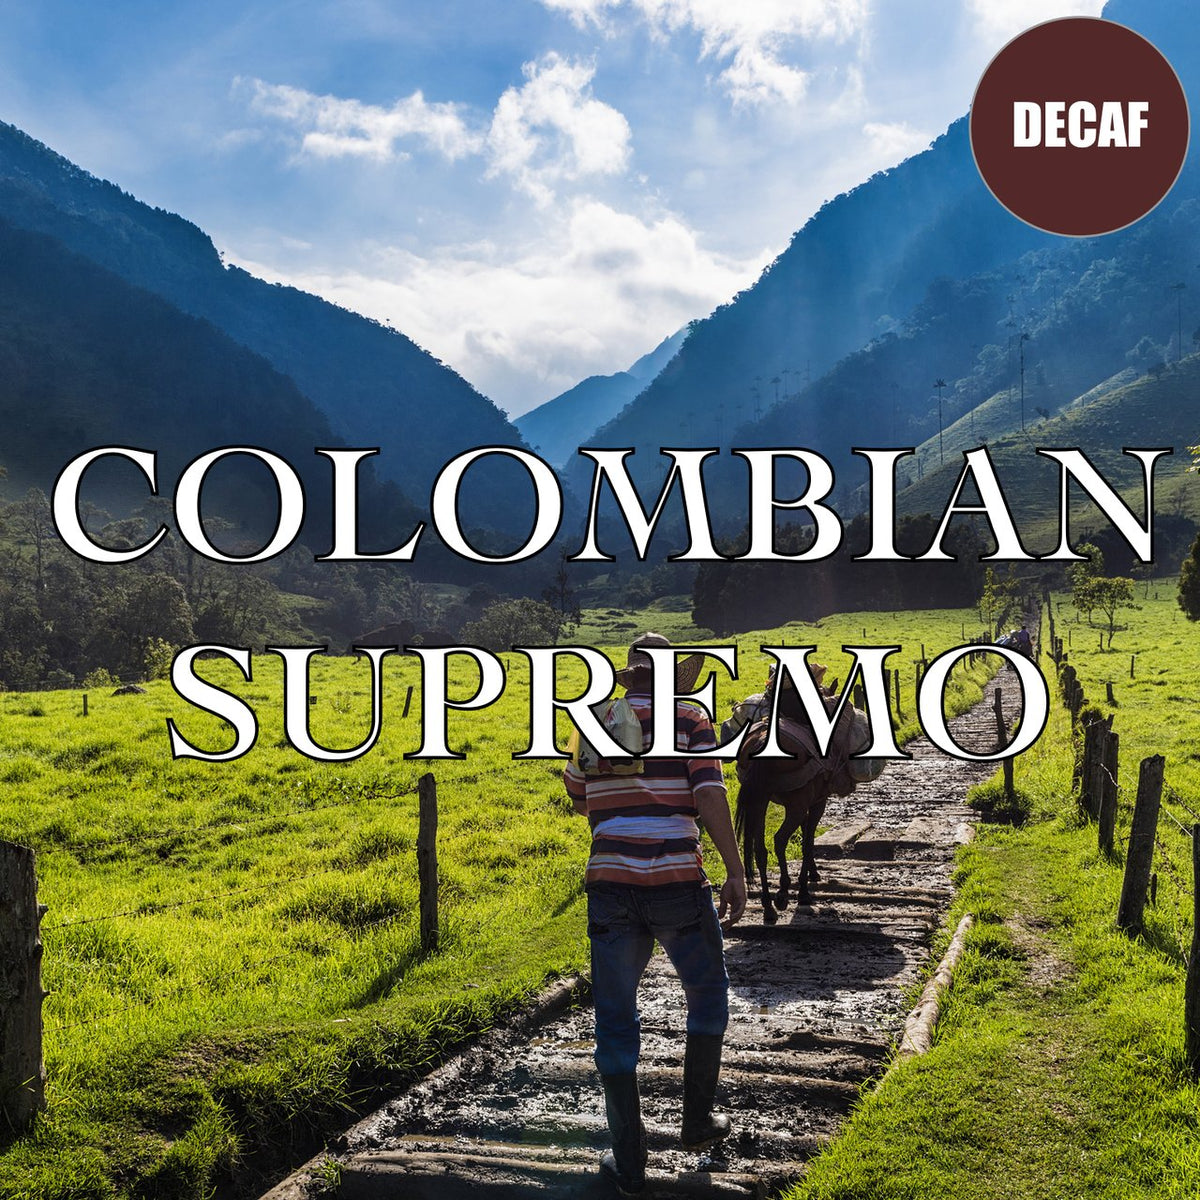 Colombian Decaf Coffee